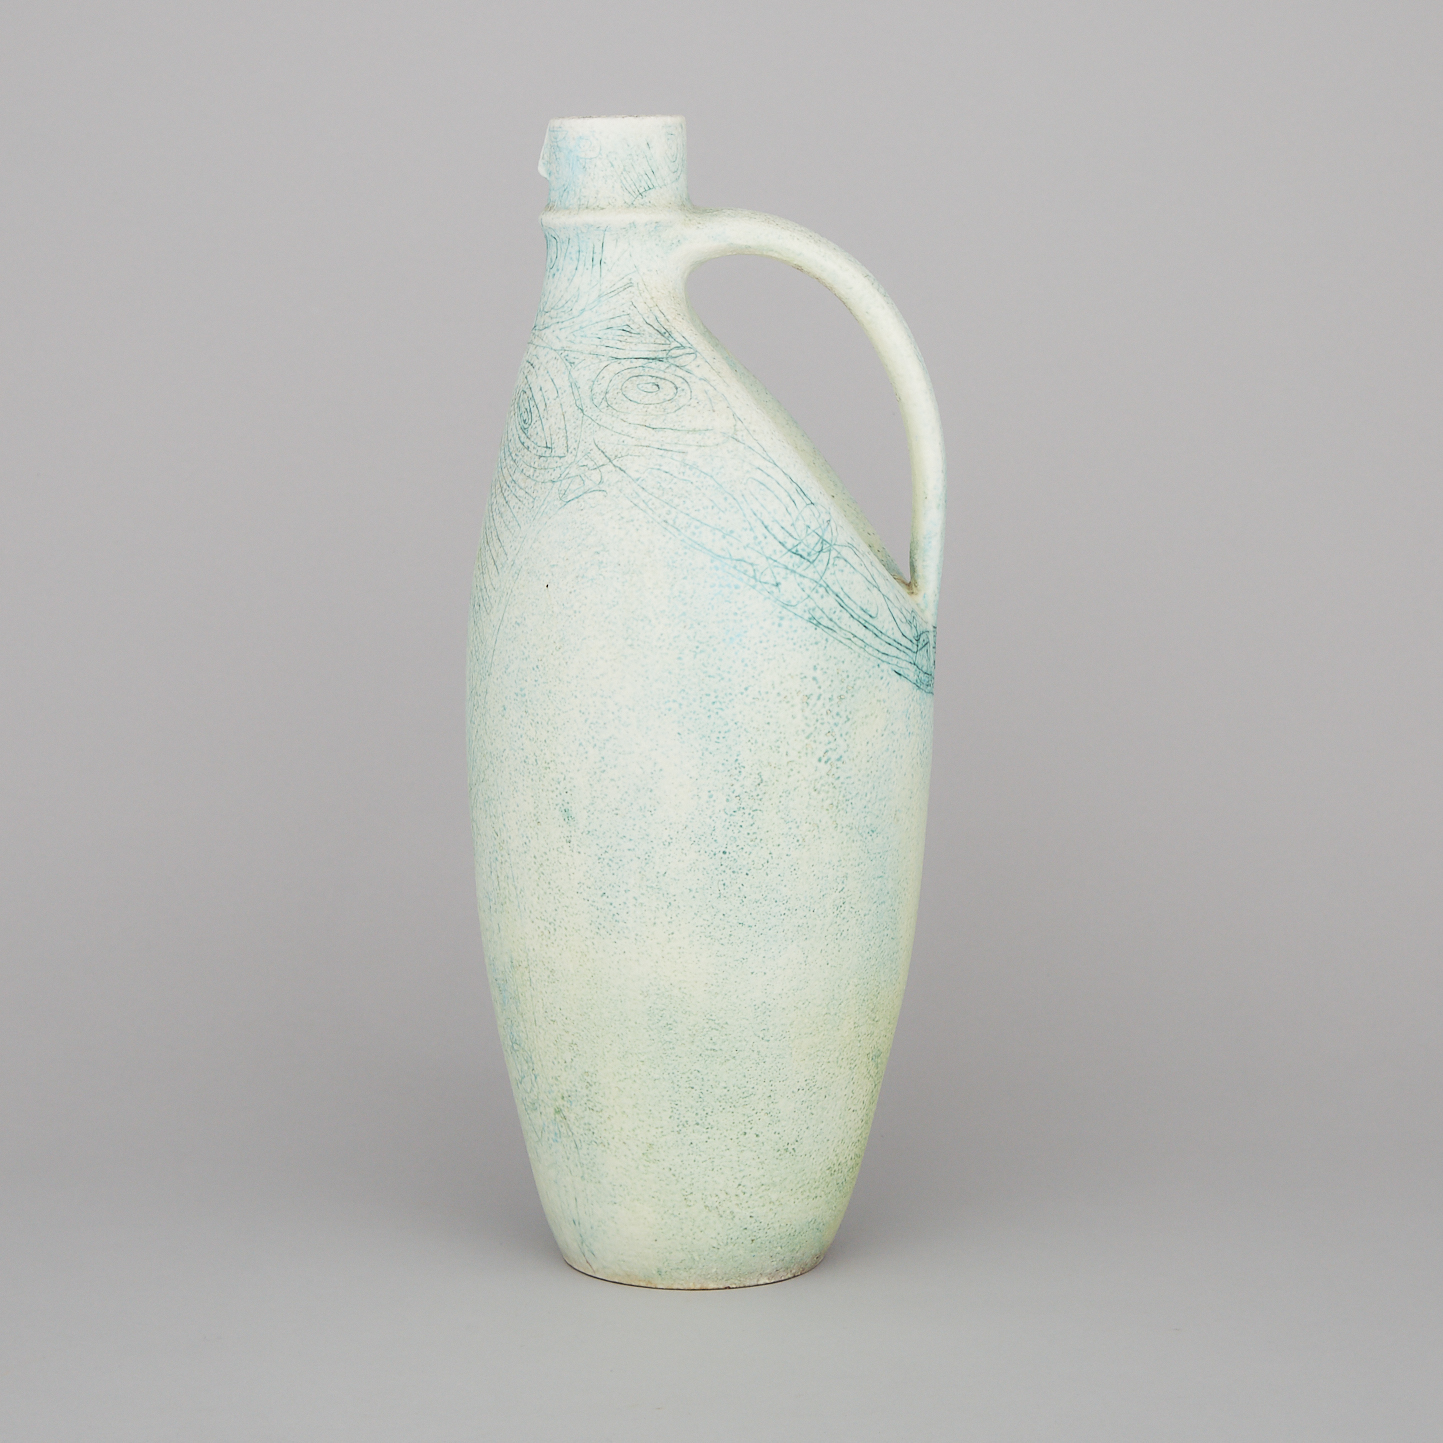 Brooklin Pottery Figural Jug, Theo and Susan Harlander, dated 1964